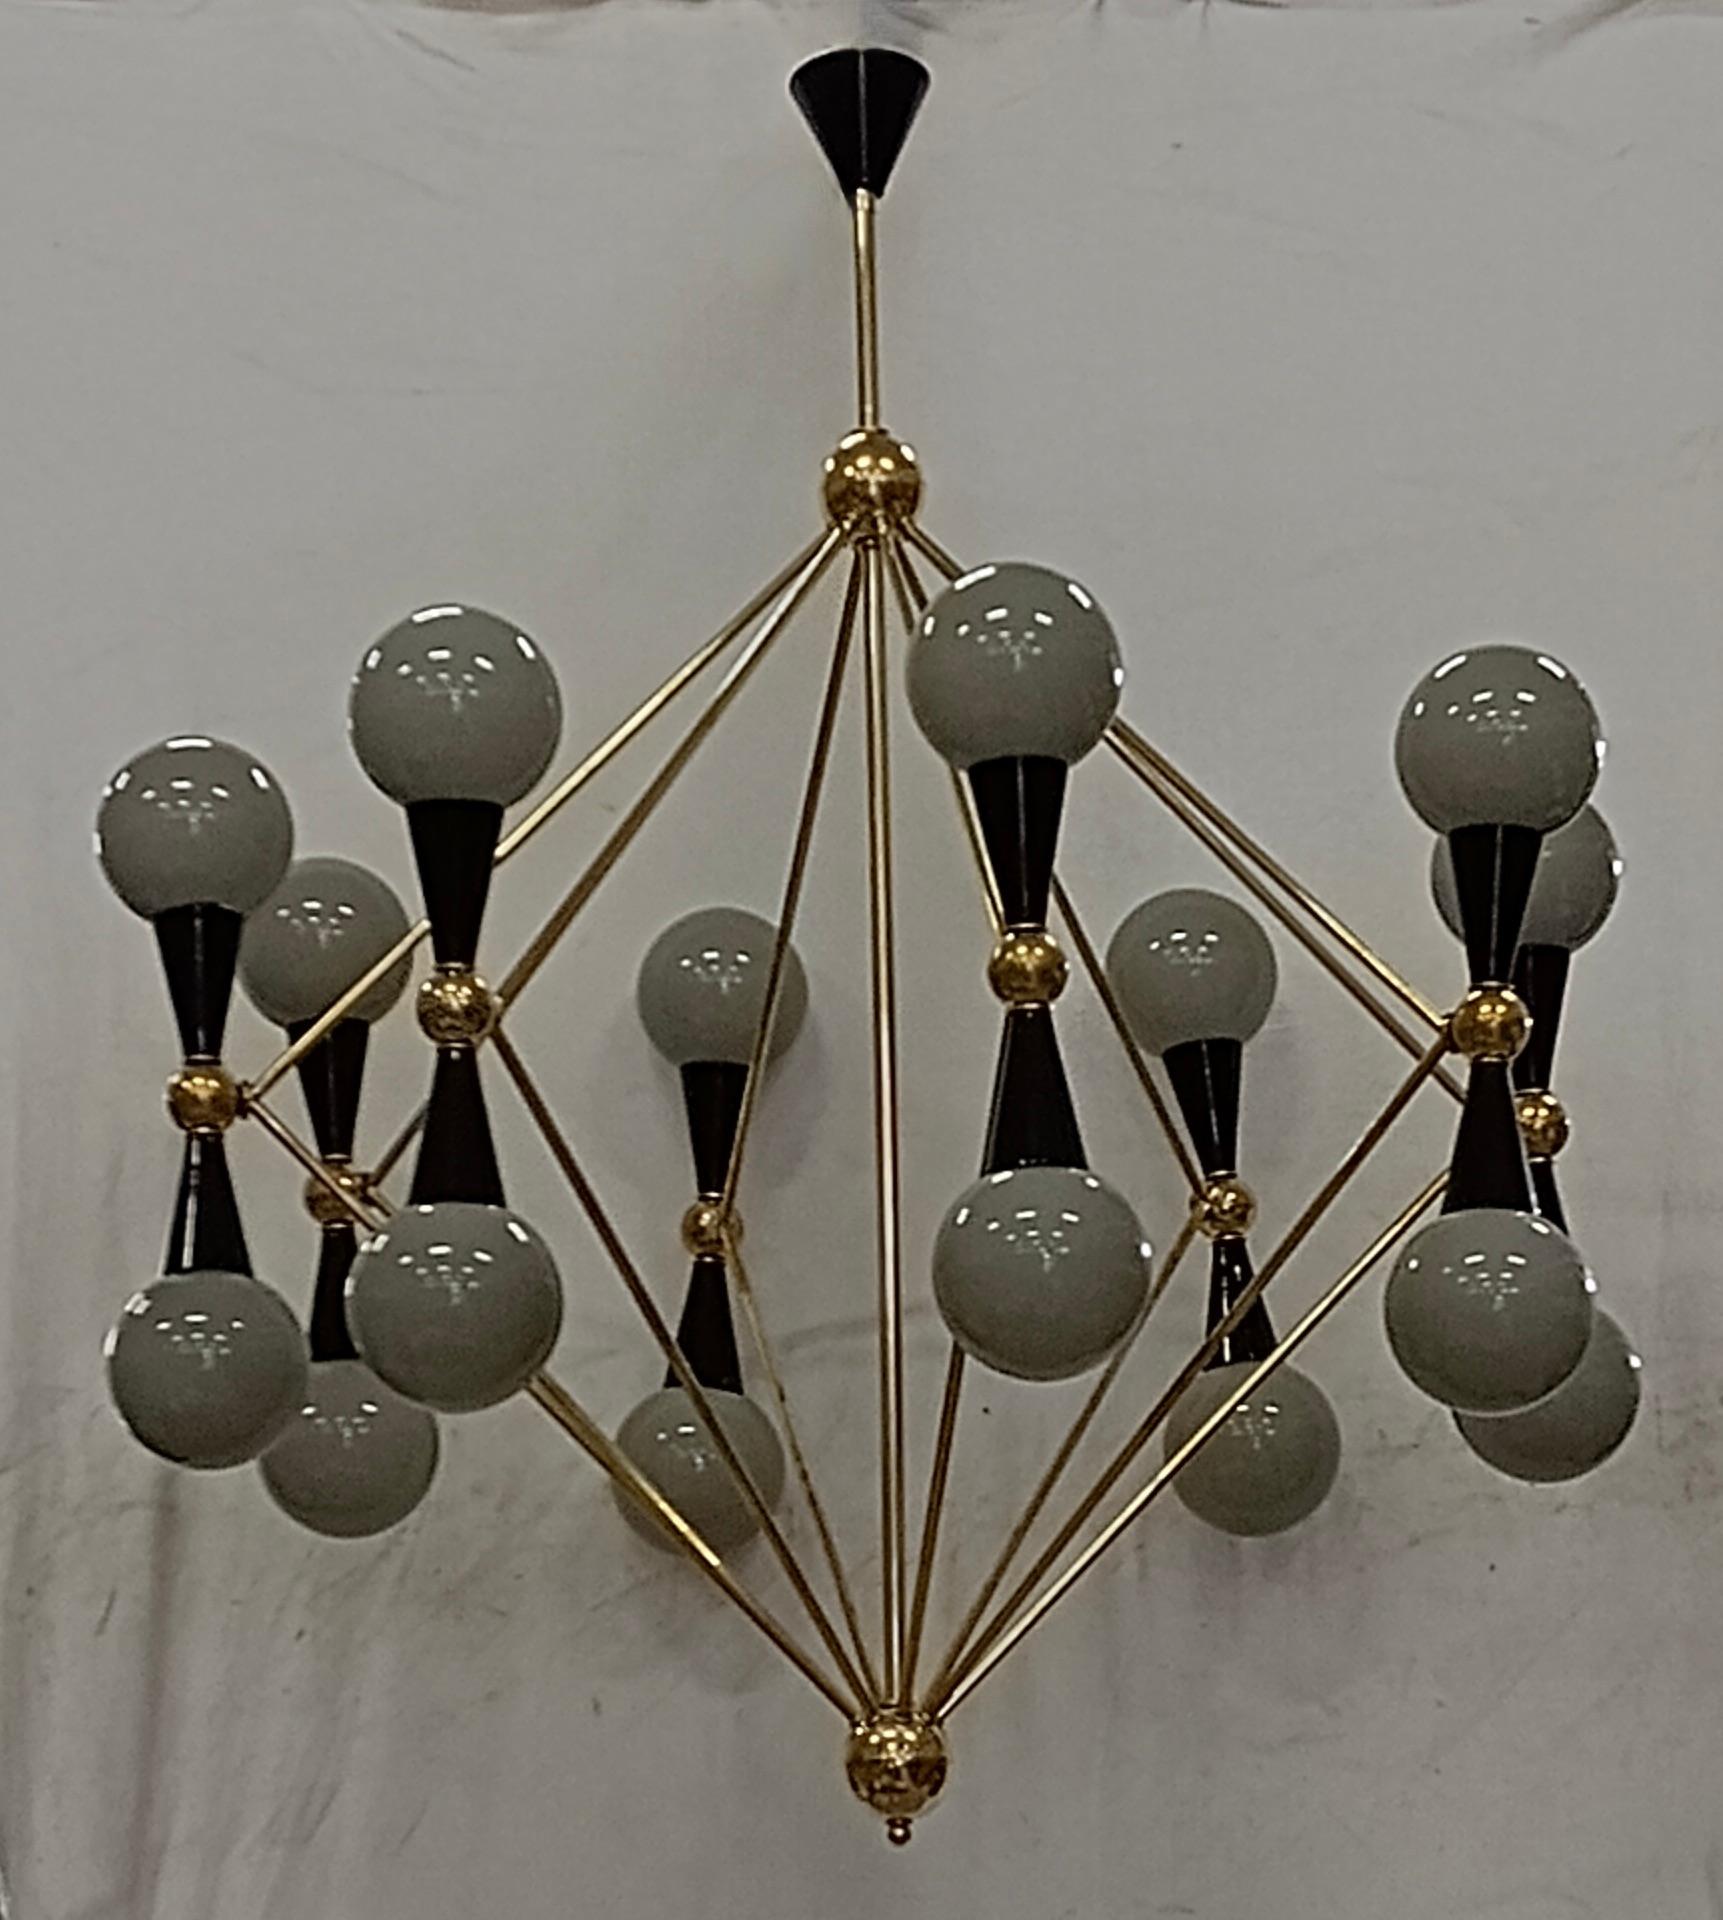 Particular circular sputnik, with brass structure and Murano grey glass spheres. It looks like a system of planets that gravitate circularly. A chandelier with a unique design of its kind, lots of brass and artistic green glass.

Chandelier with